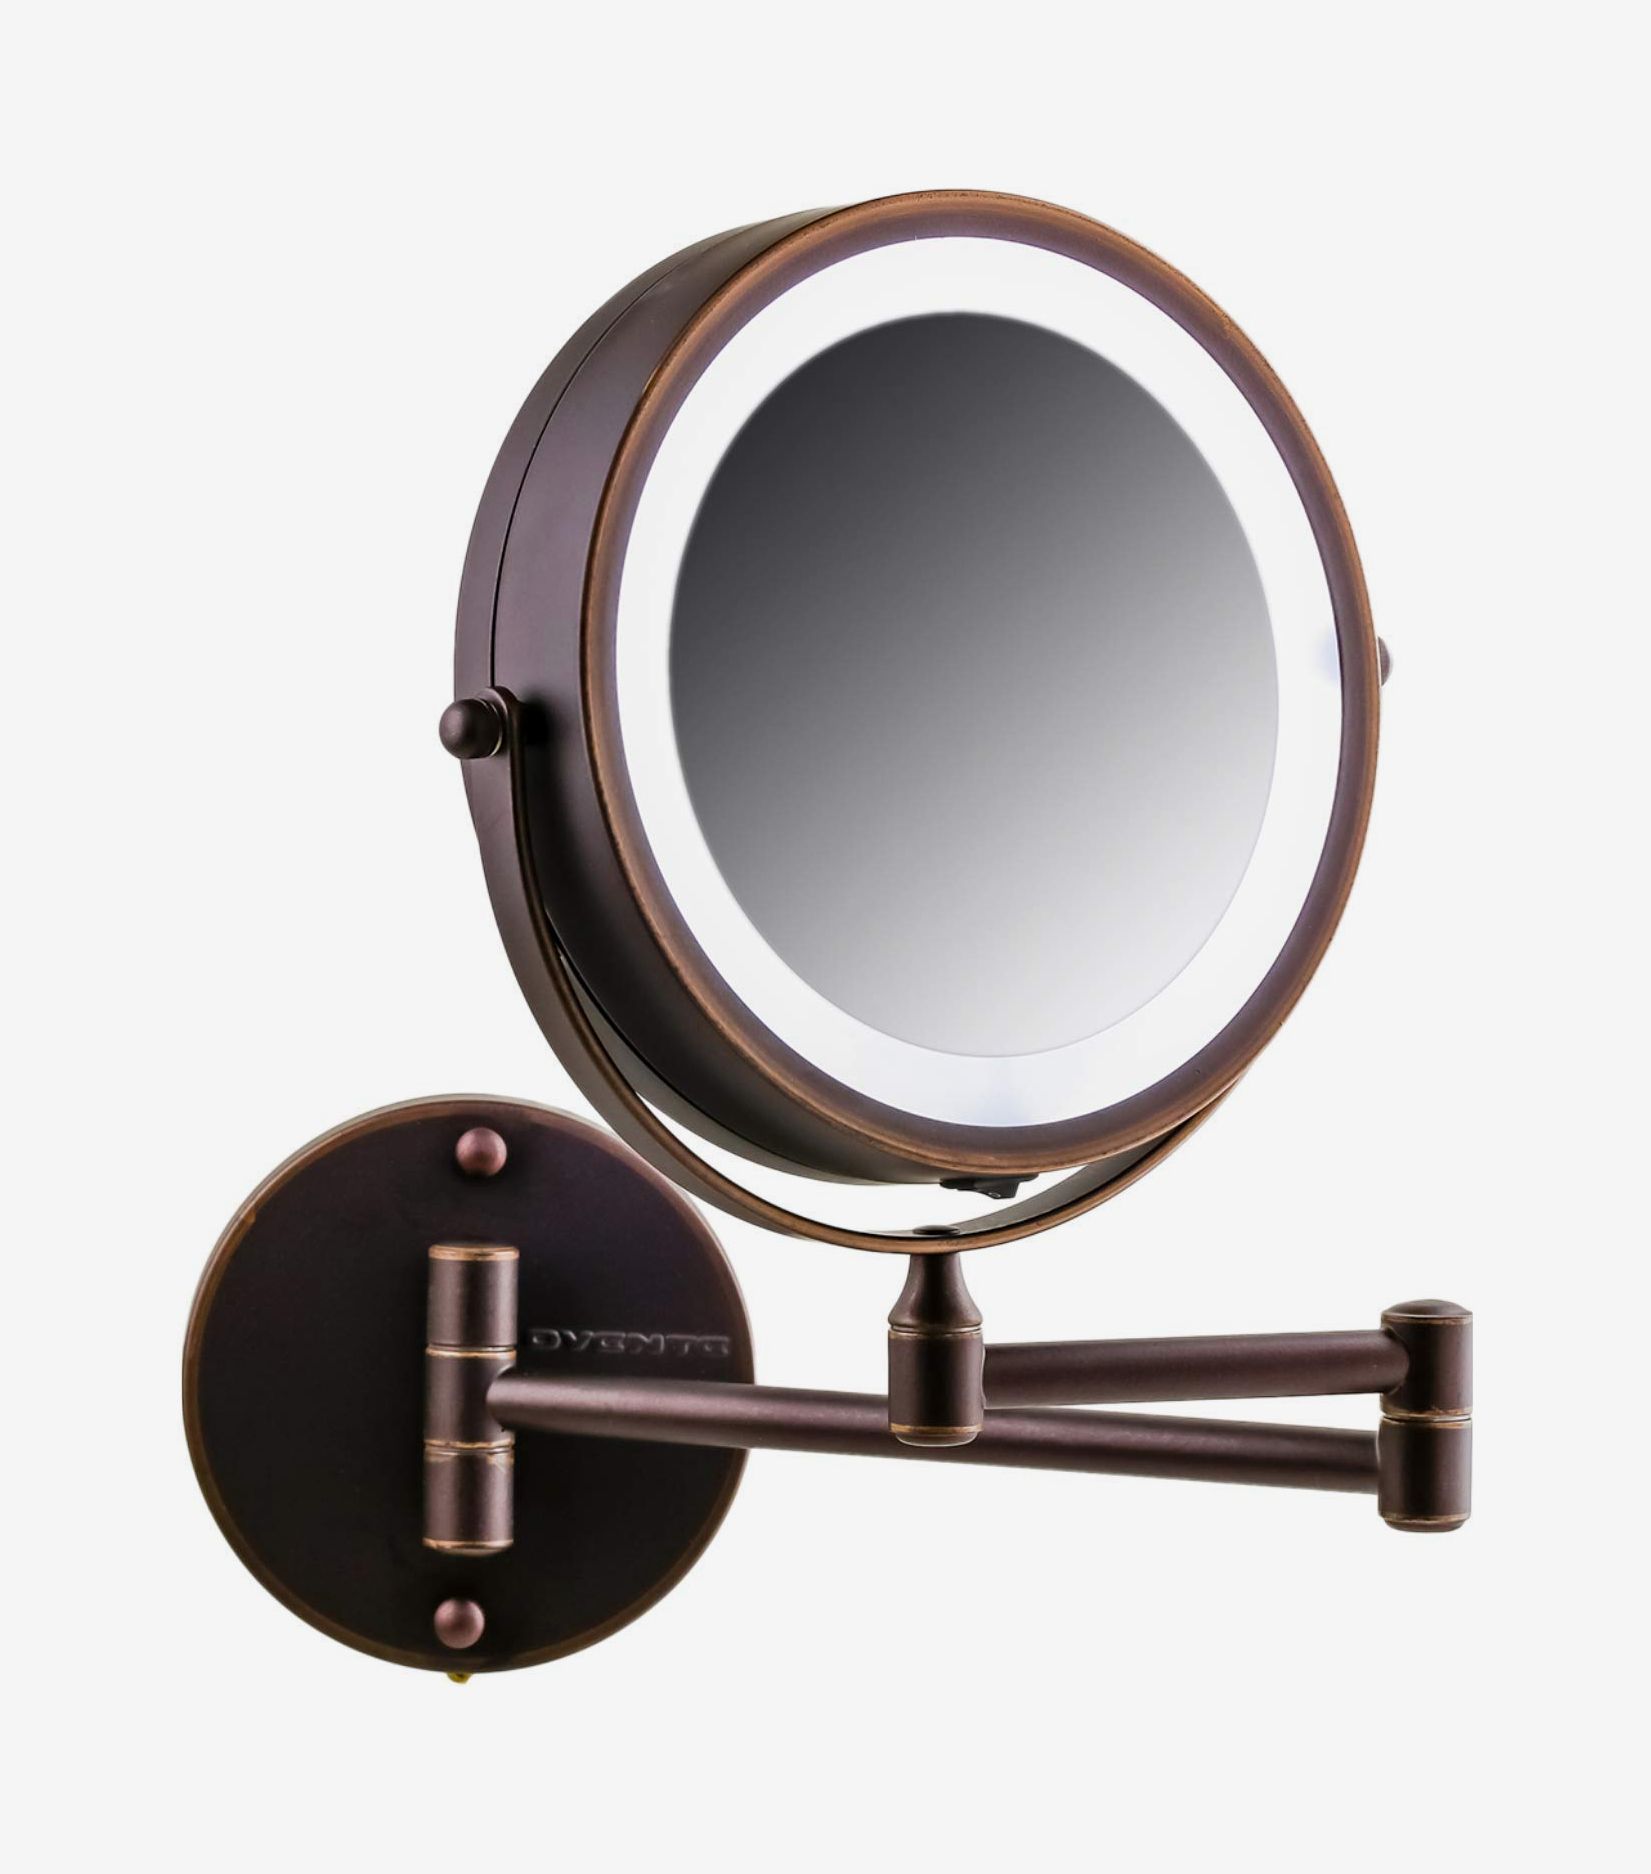 14 Best Lighted Makeup Mirrors 2022, What Is The Strongest Makeup Mirror